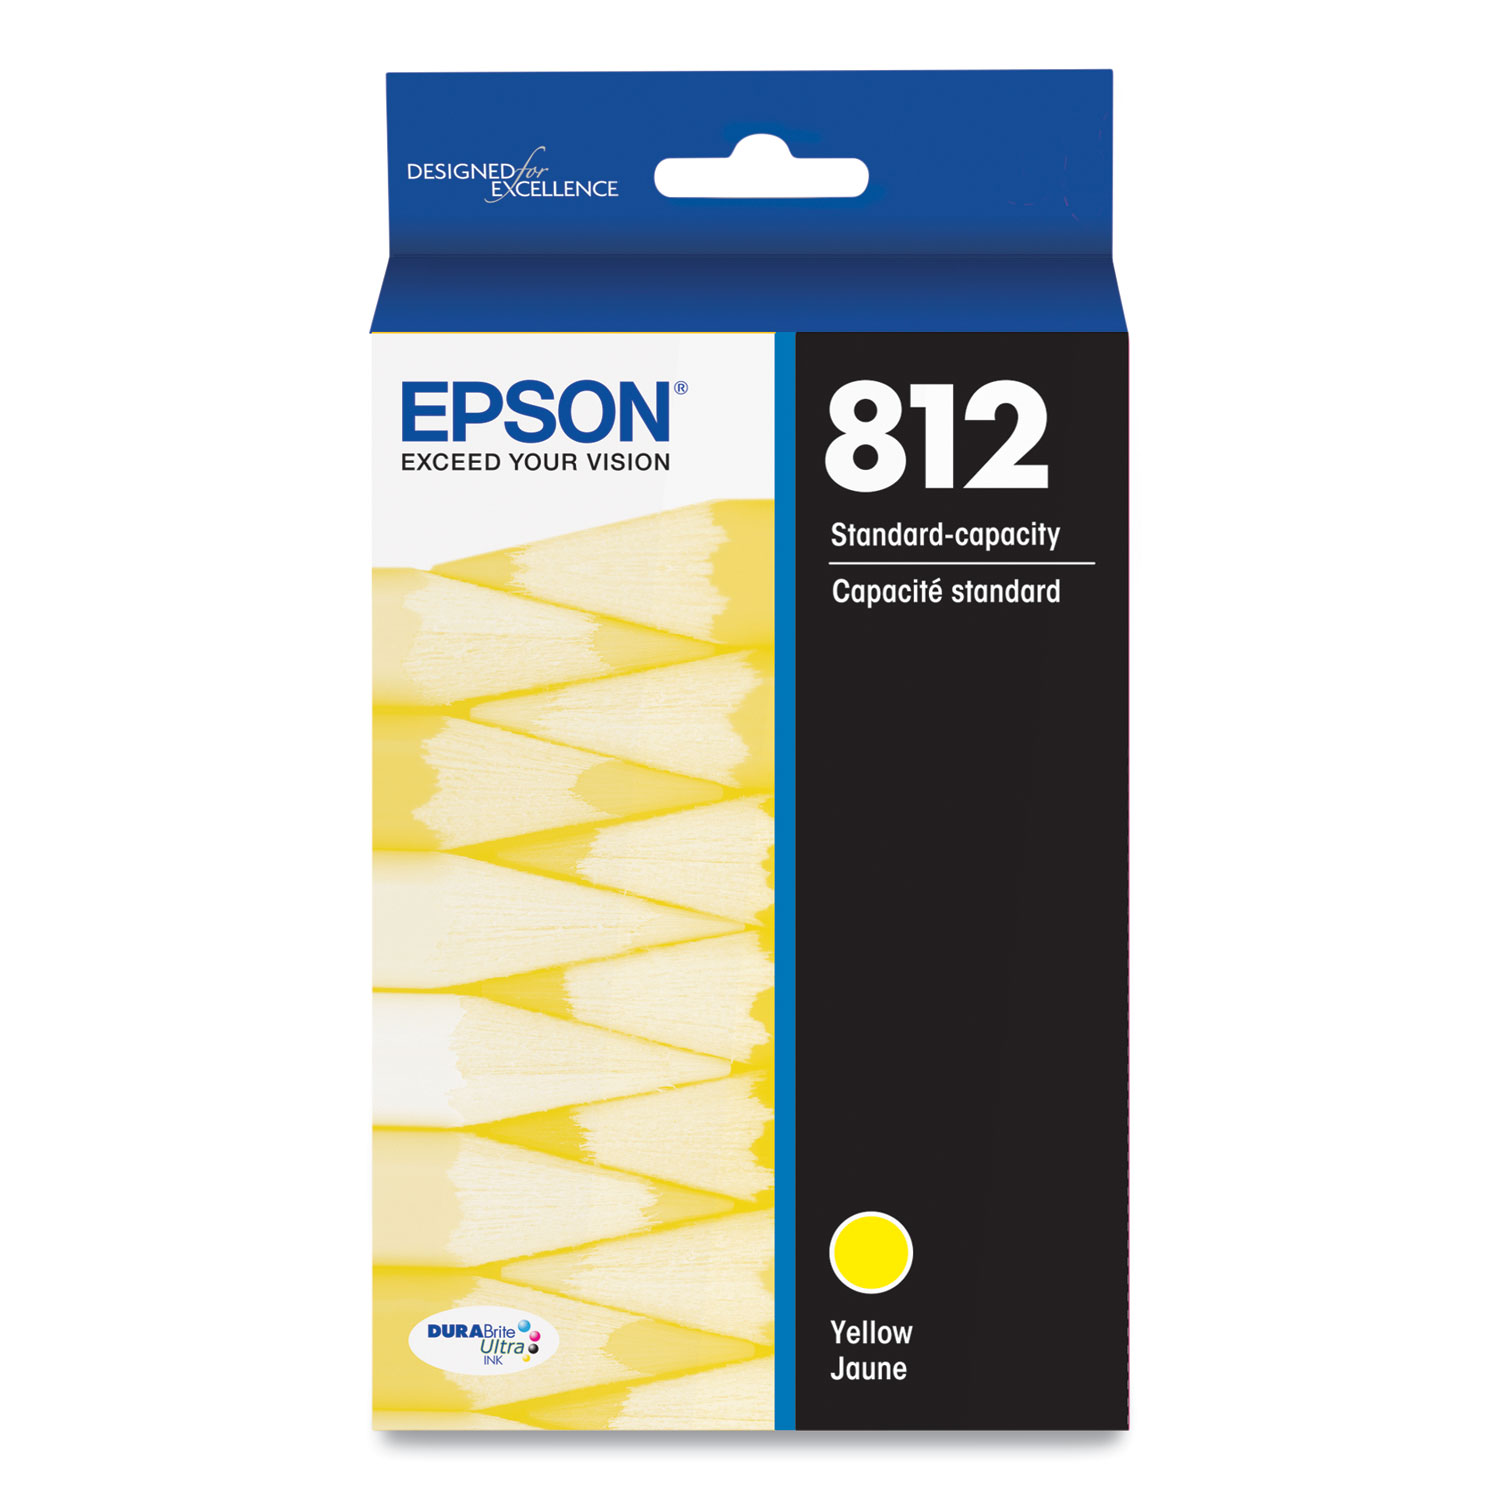 Epson® T812420S (T812) DURABrite Ultra Ink, 300 Page-Yield, Yellow